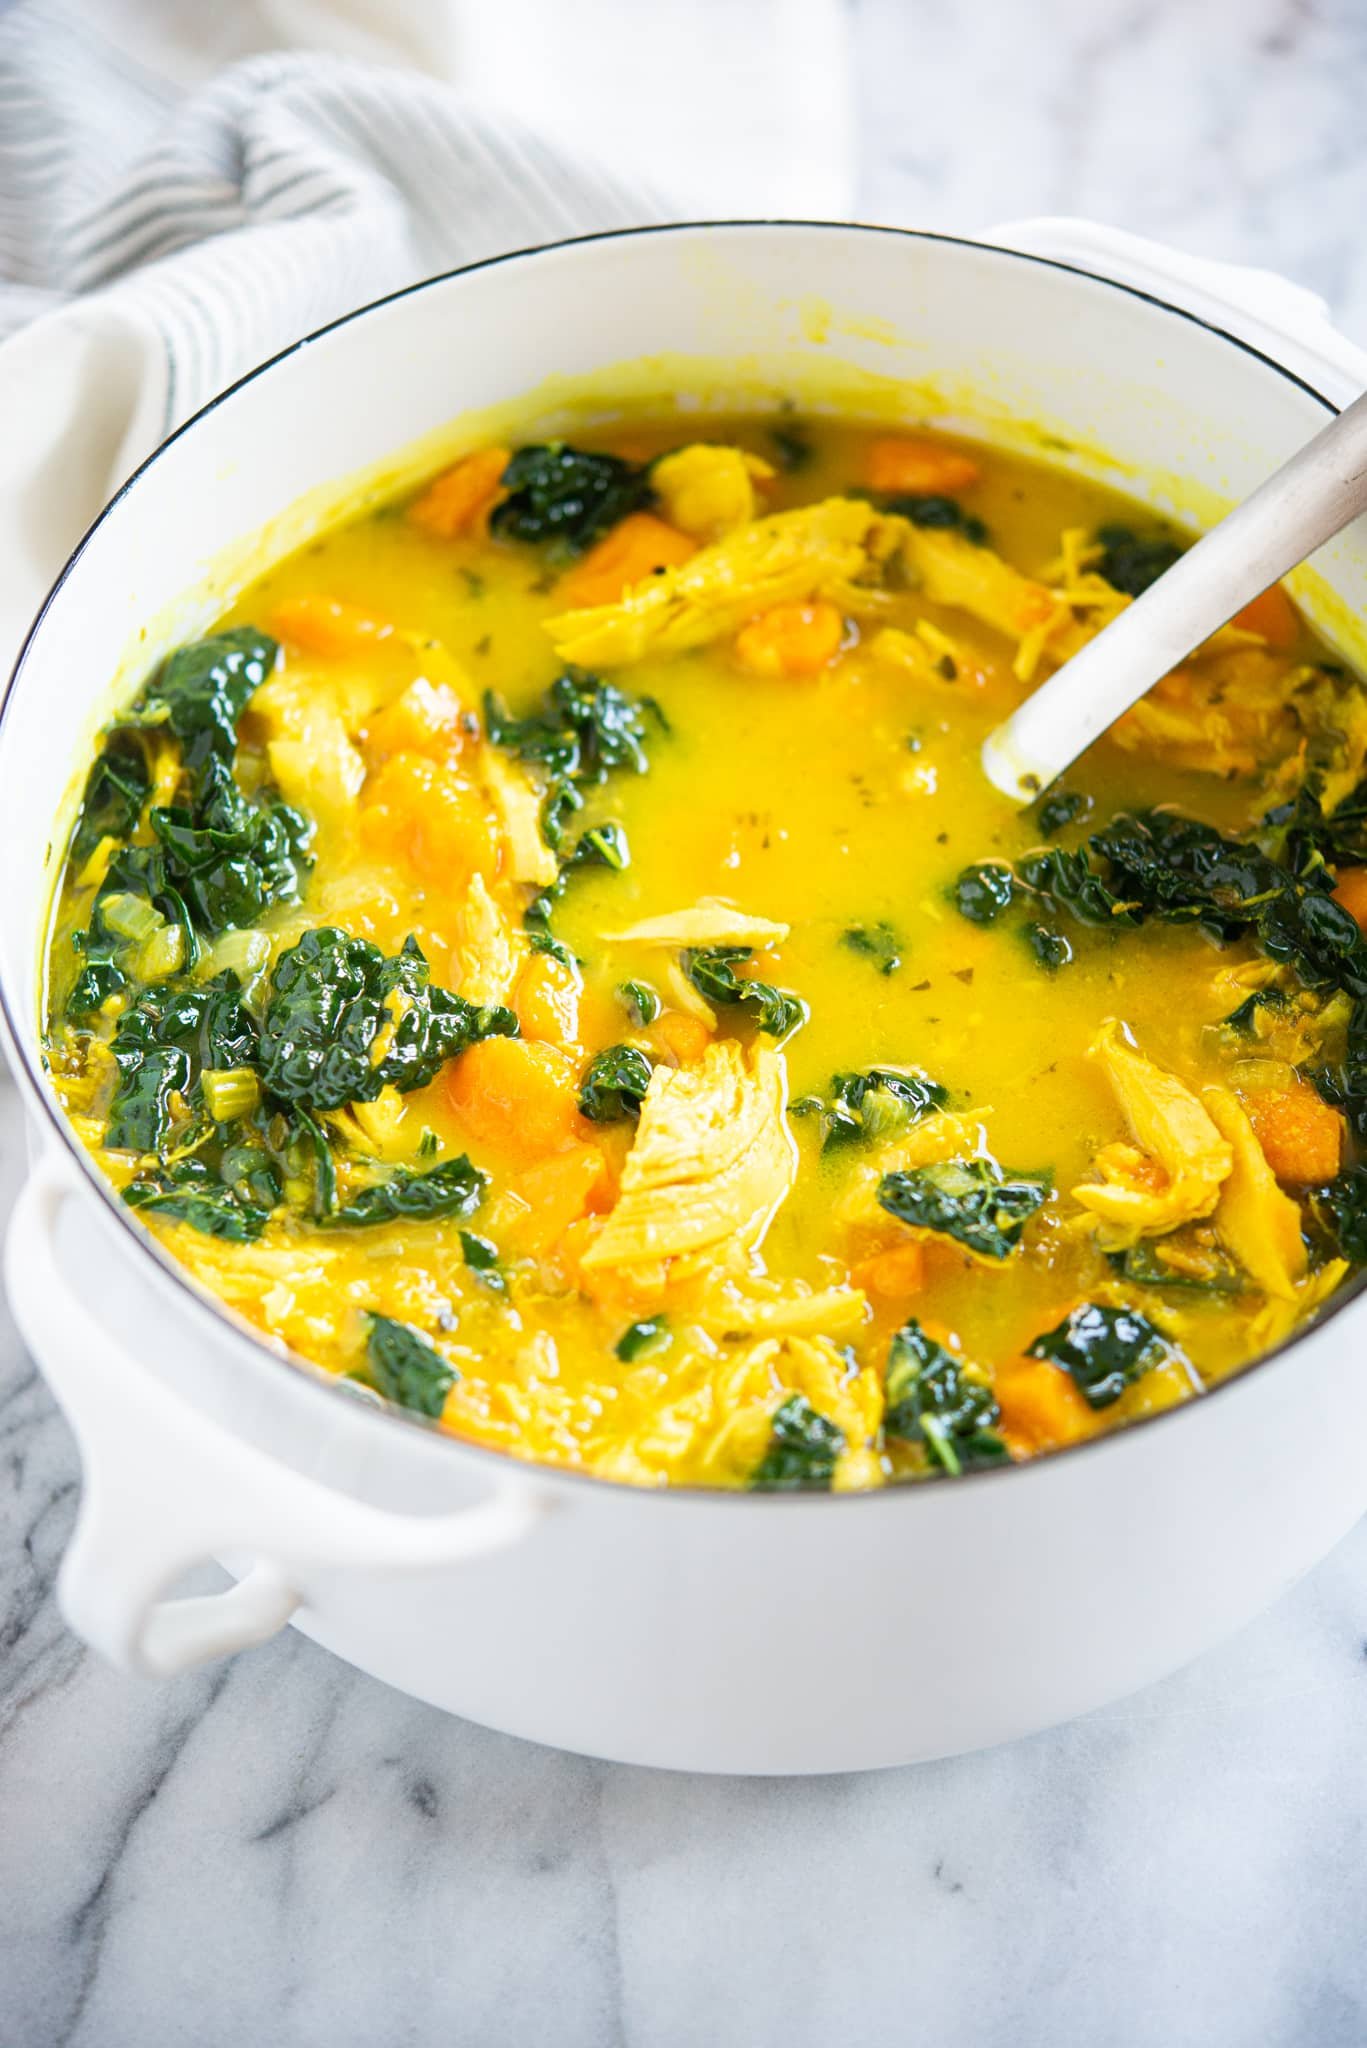 healing chicken soup with yellow turmeric broth, sweet potatoes, and kale in a white pot on a marble surface